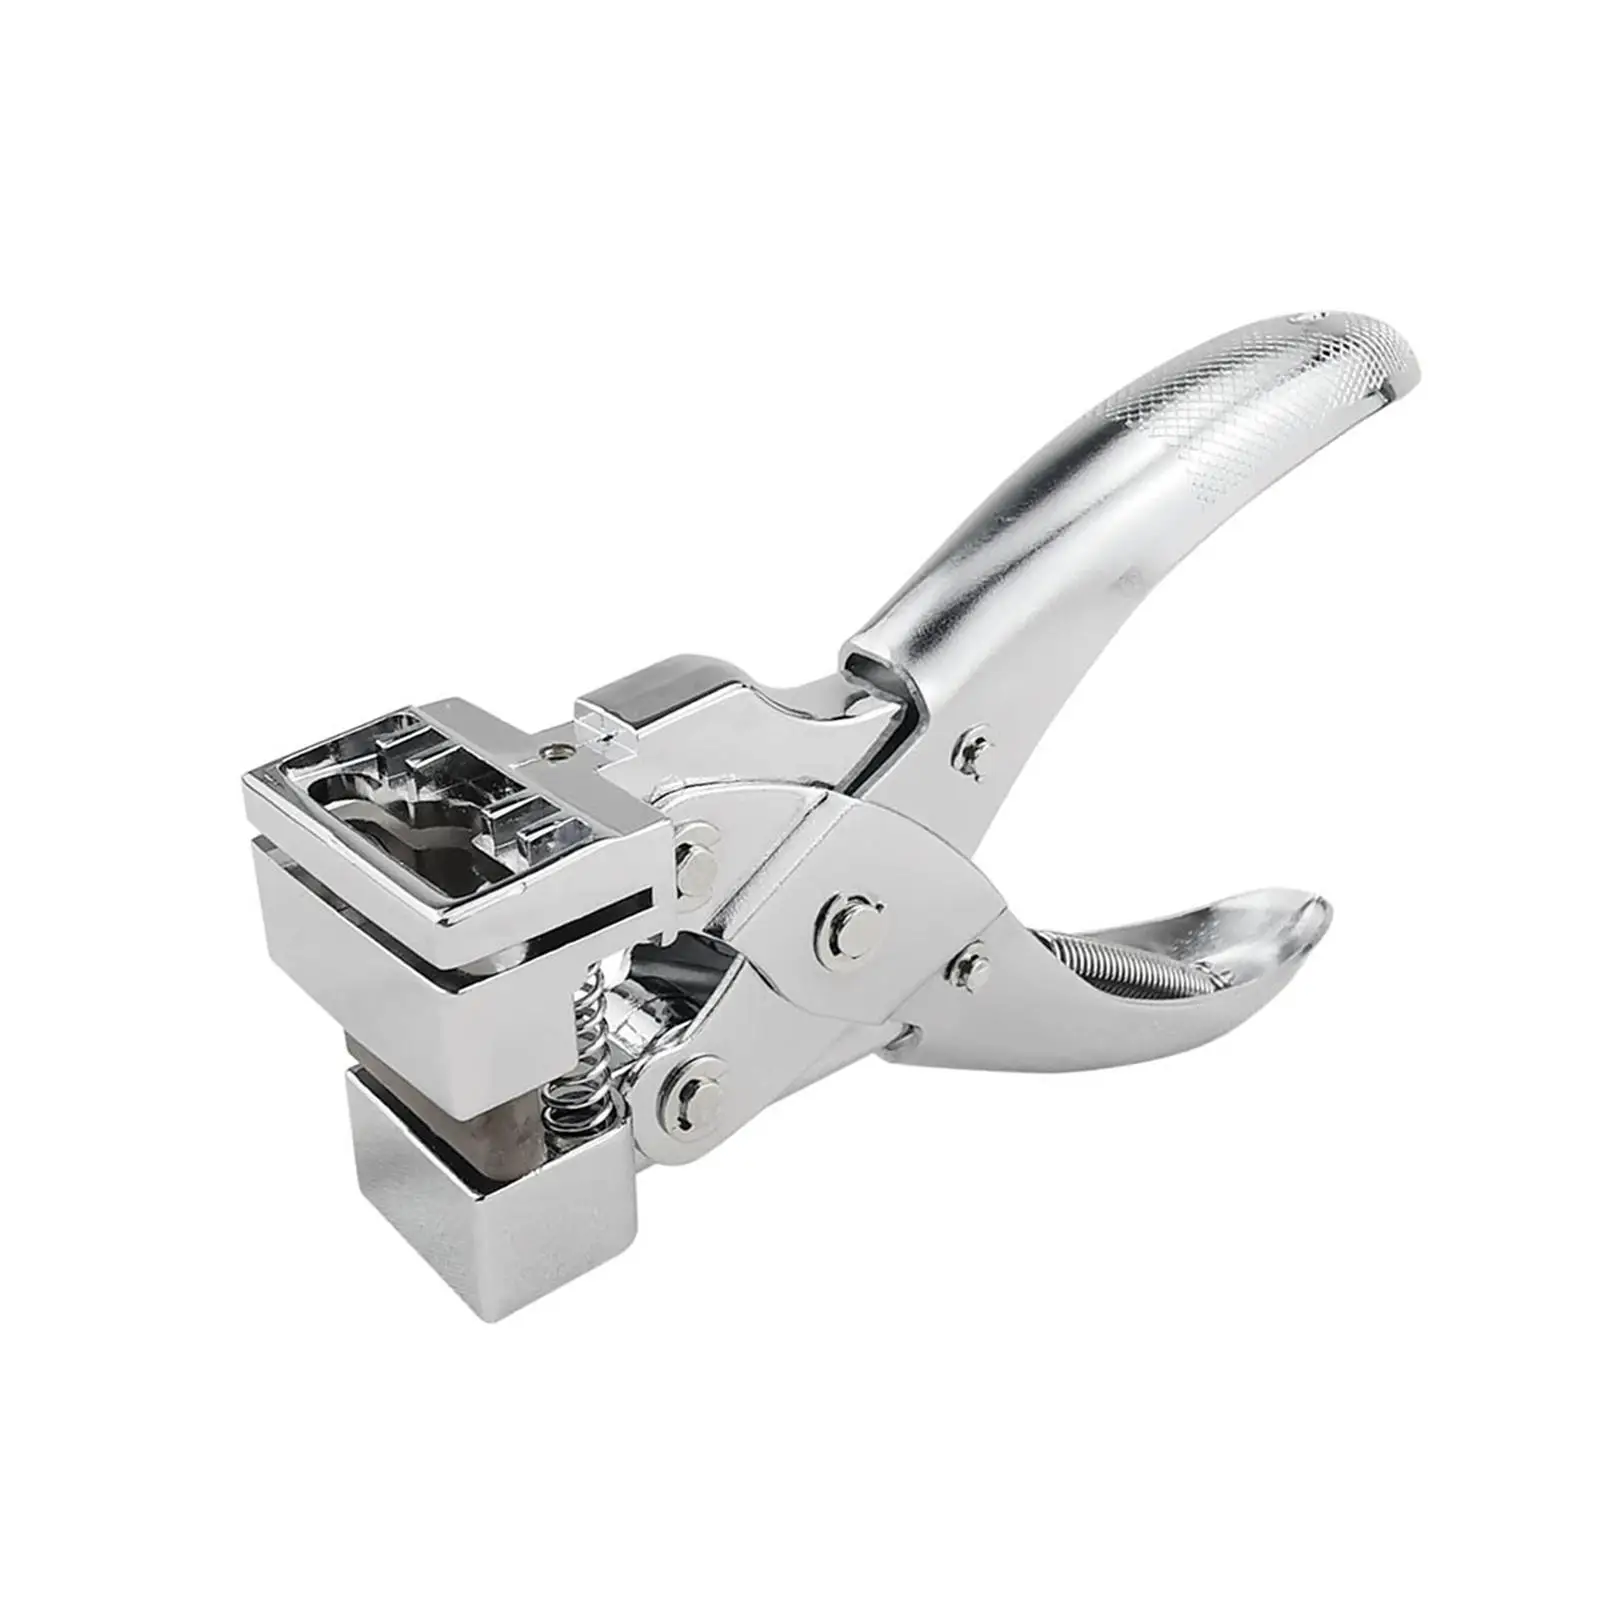 Slot Punch Portable Paper Puncher Hook Clamp Pliers T Slot Hole Punch Hole Puncher Tool for ID Card Tag DIY Crafts